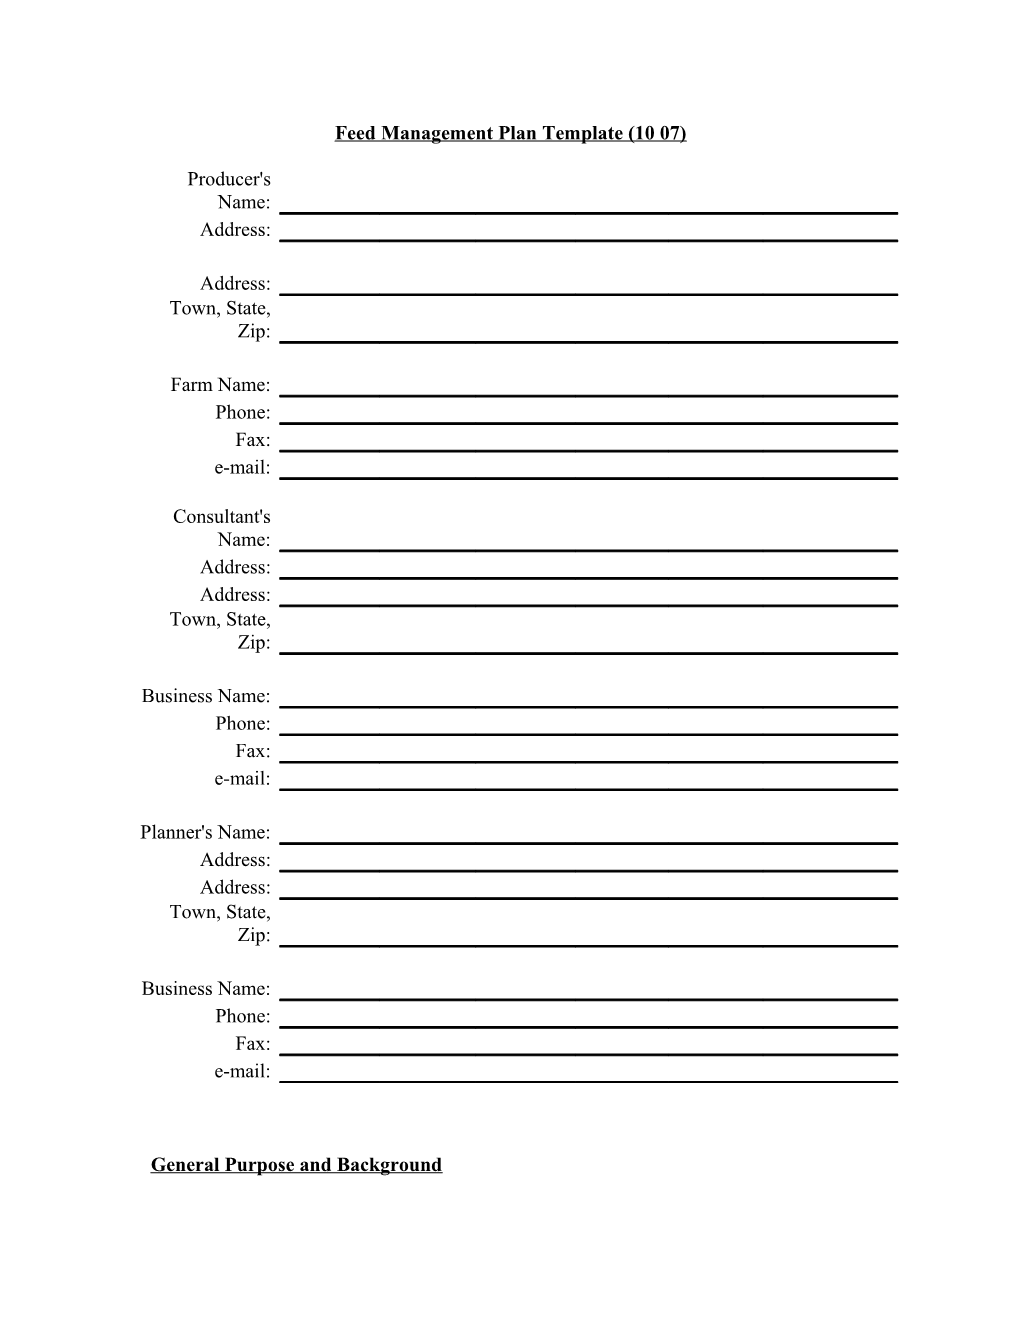 Feed Management Plan Template